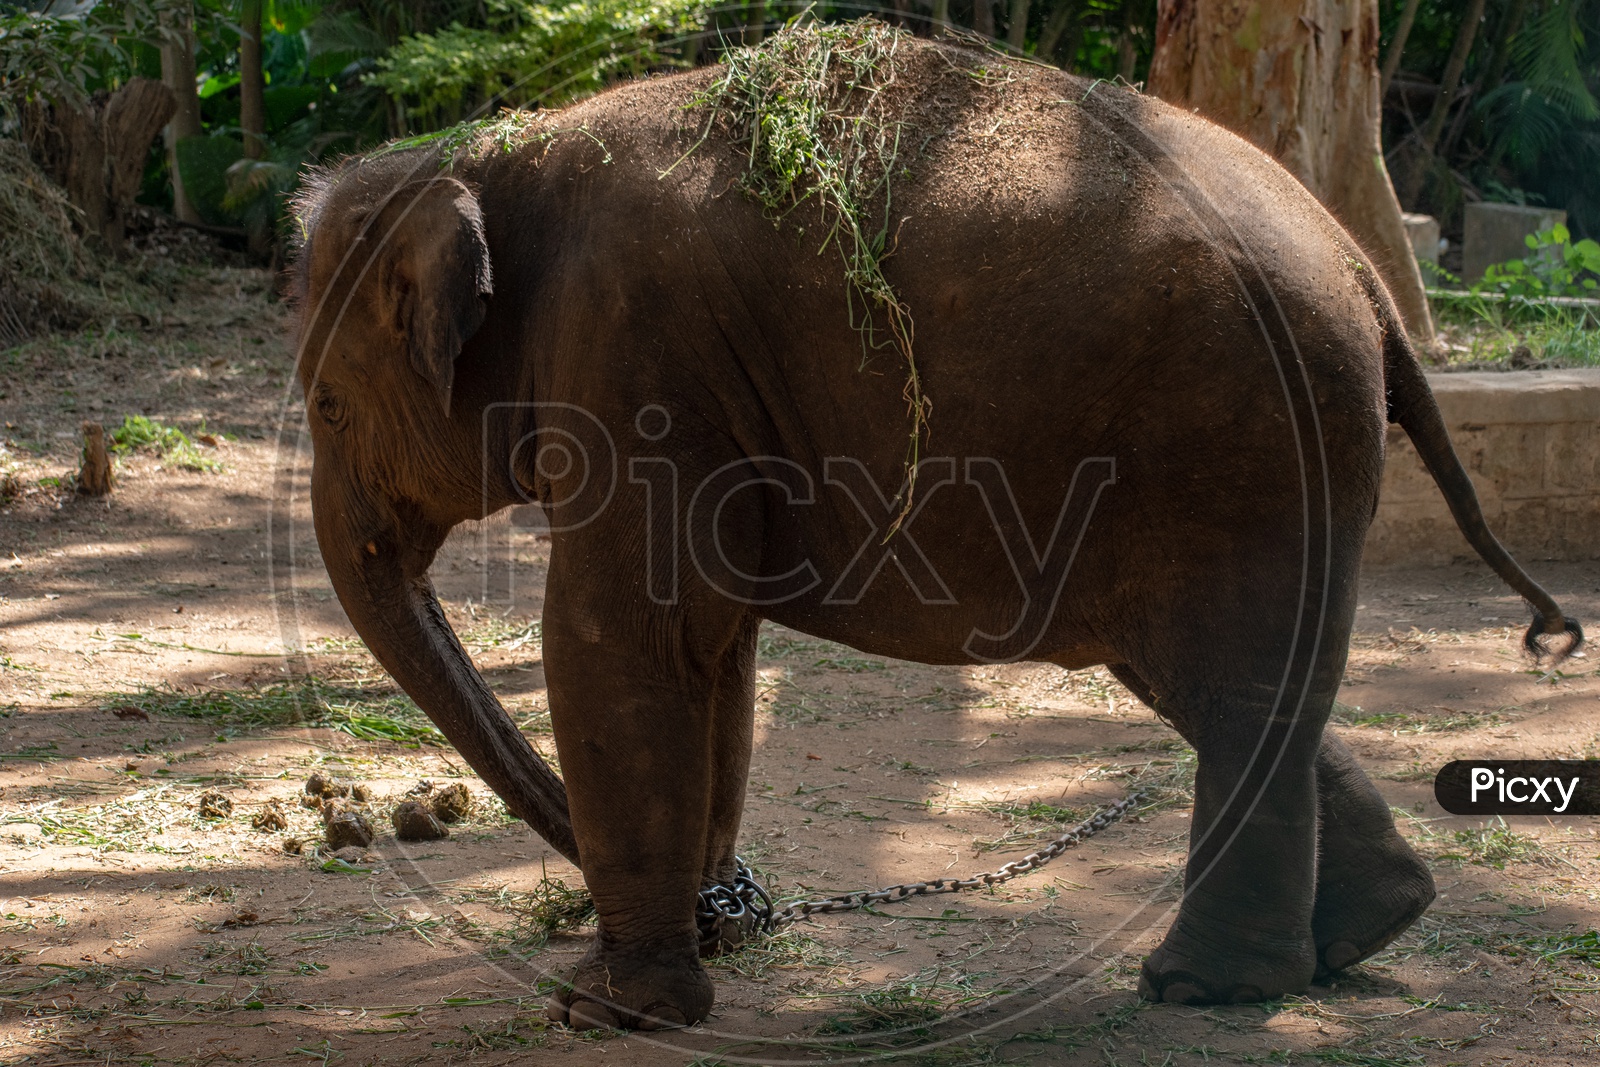 BABY ELEPHANT TIED WITH CHAINS IN ZOO PARK